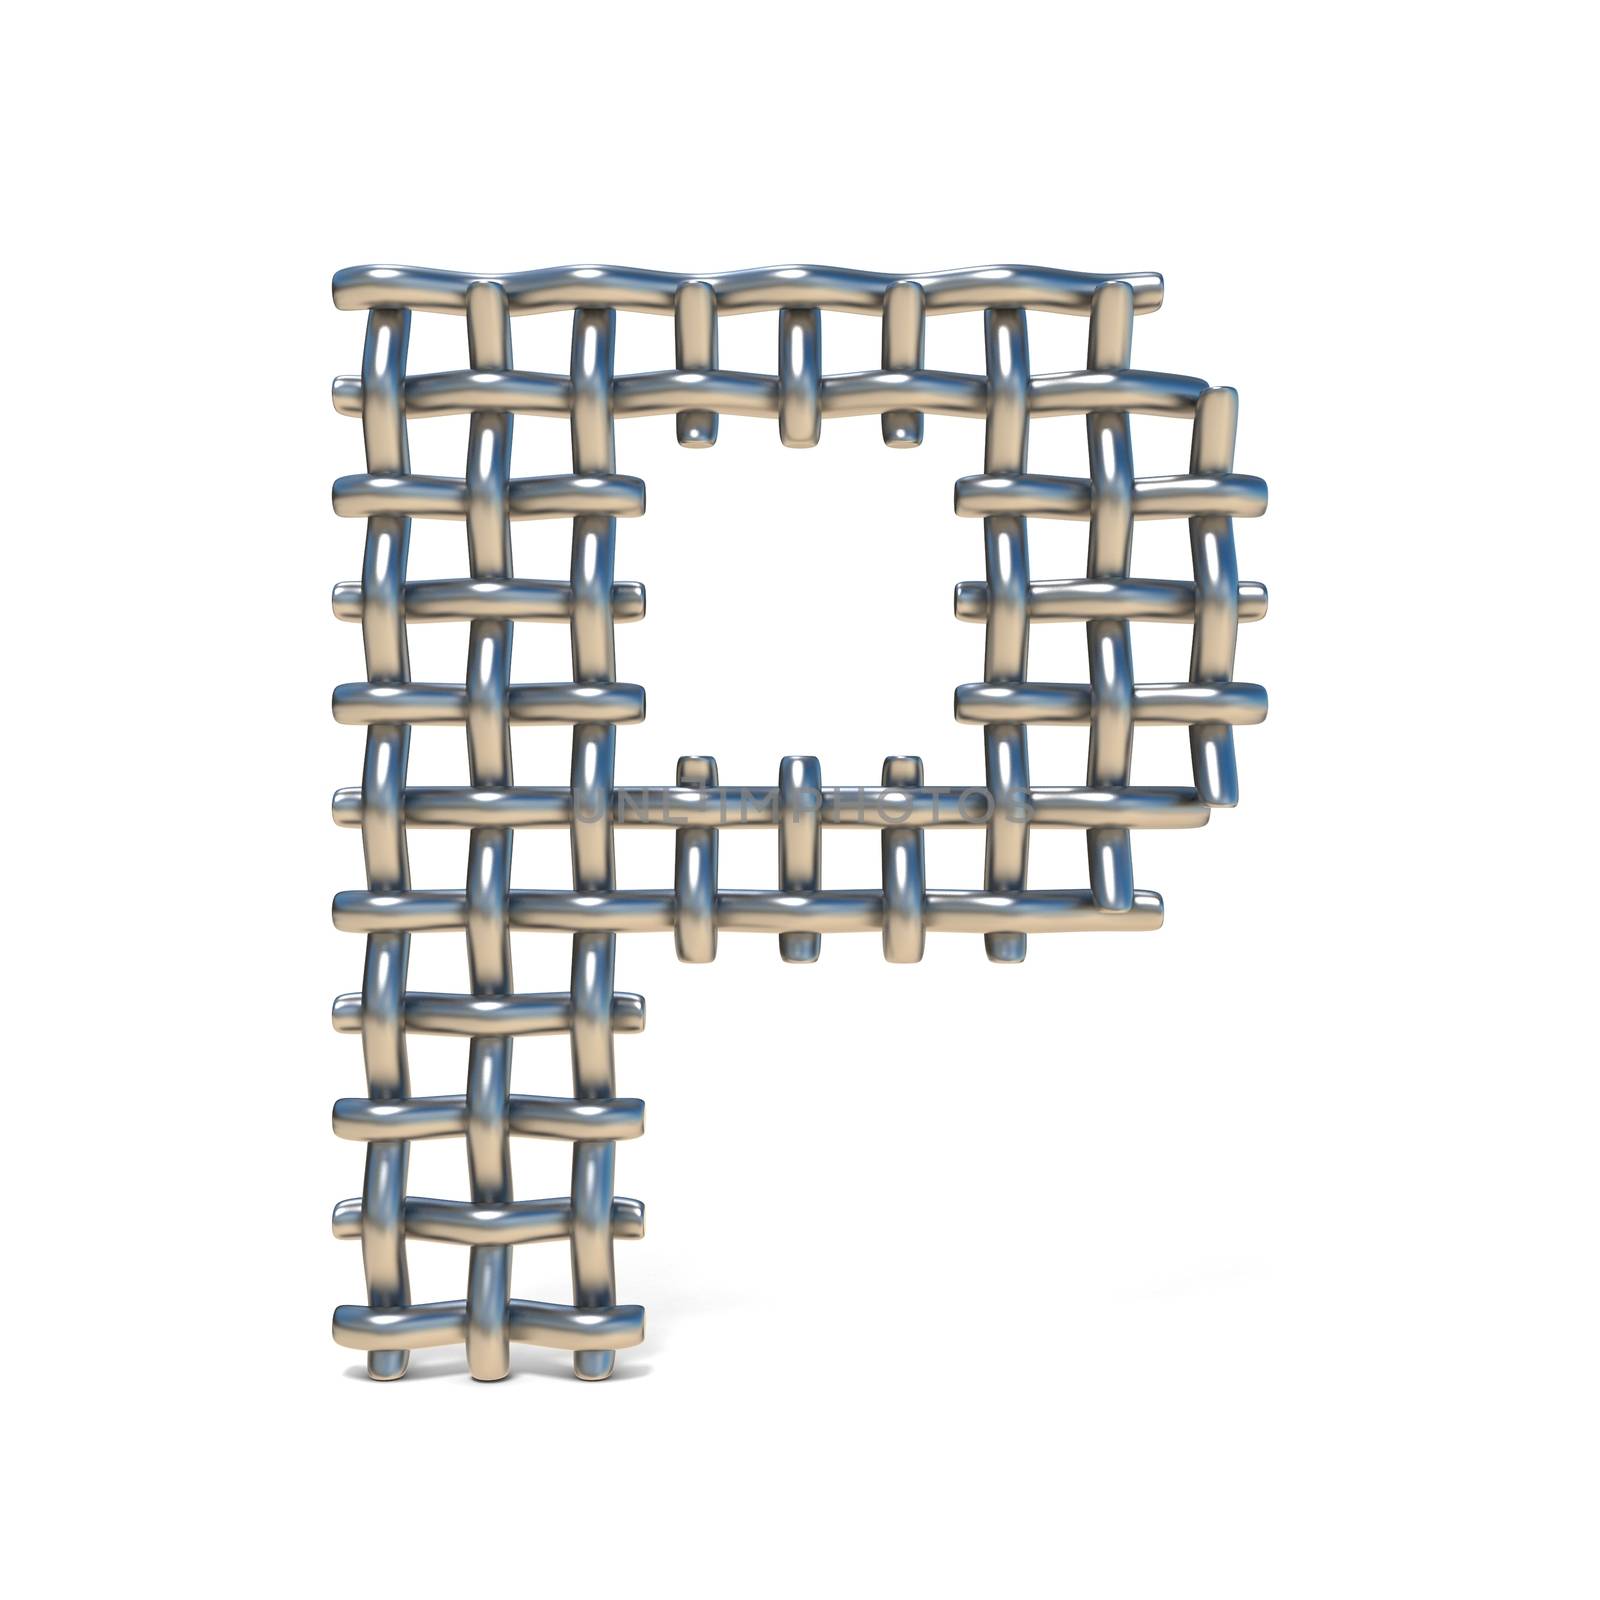 Metal wire mesh font LETTER P 3D by djmilic